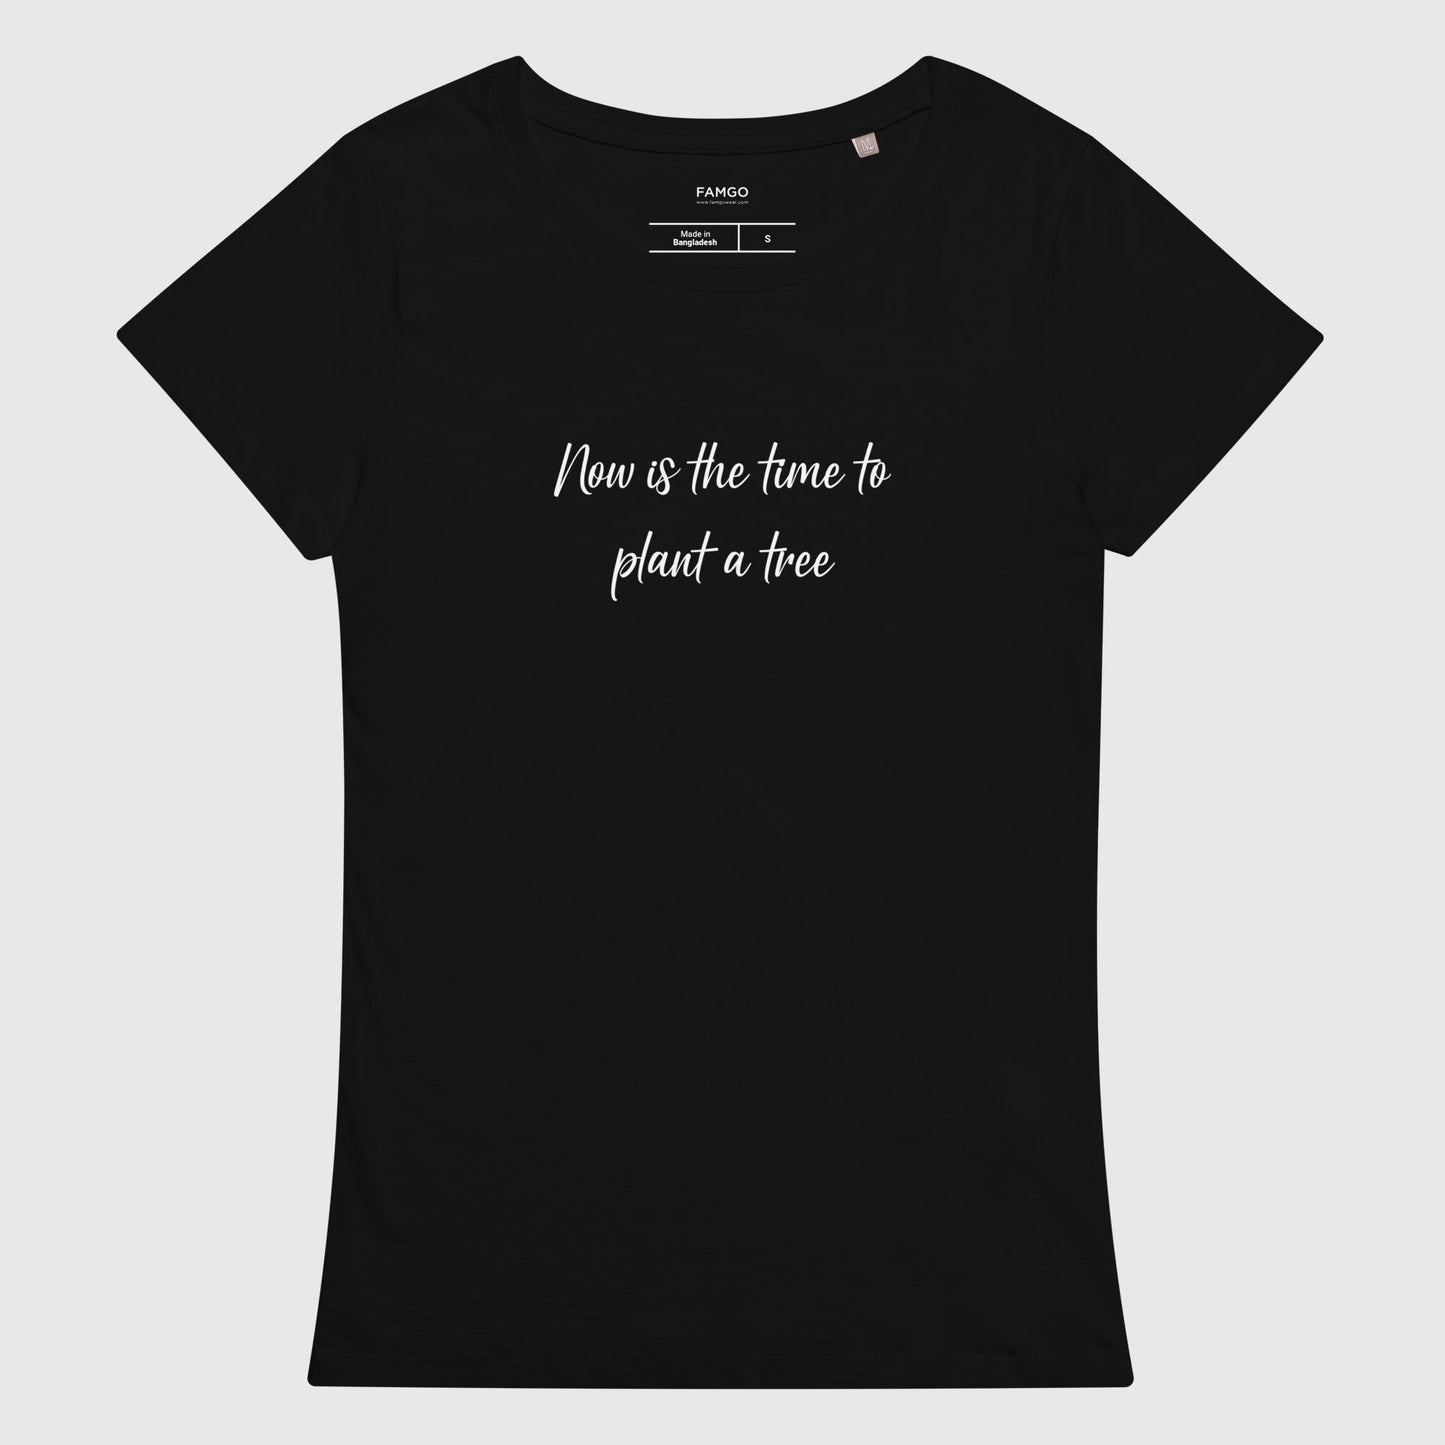 Women's black organic cotton t-shirt that features, "Now is the time to plant a tree,' inspired by the Chinese proverb, "The best time to plant a tree was 20 years ago. The second best time is now."